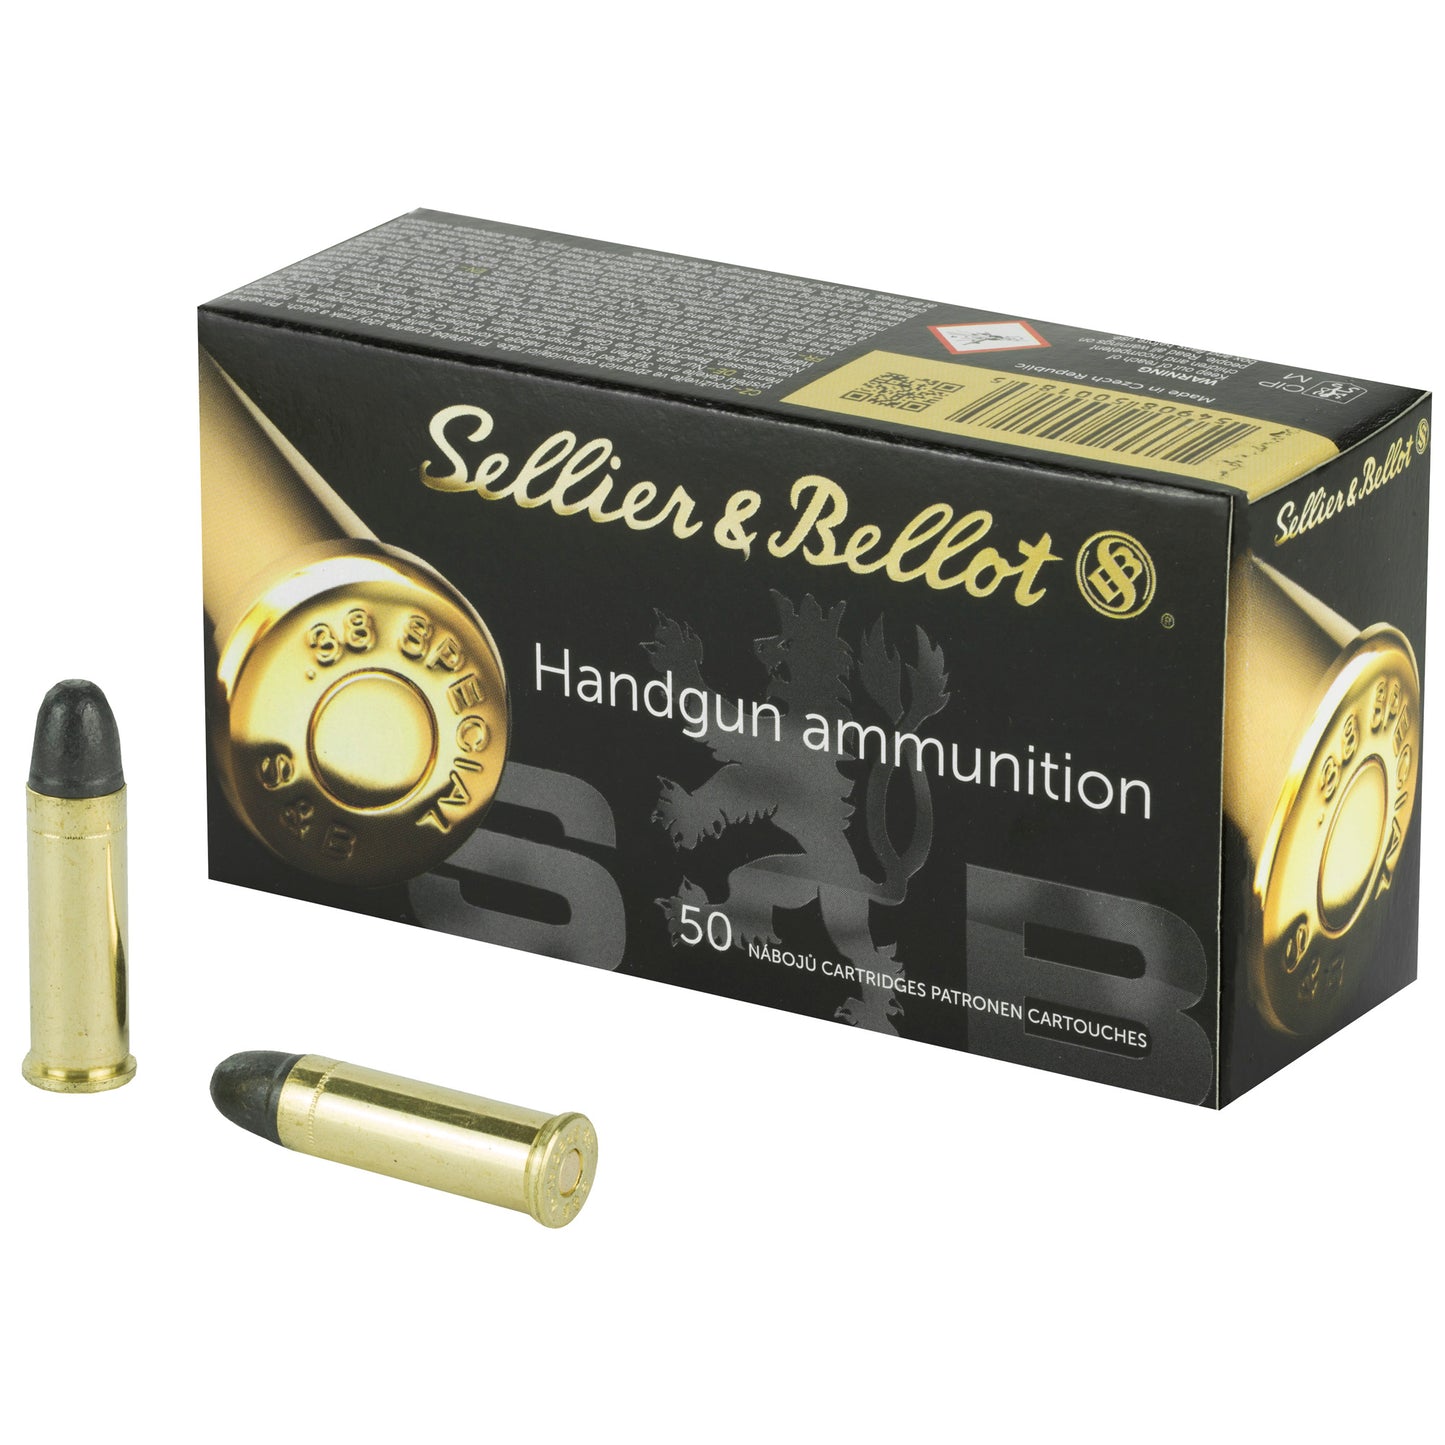 Sellier & Bellot, Pistol, 38 Special, 158 Grain, Lead Round Nose, 50 Round Box